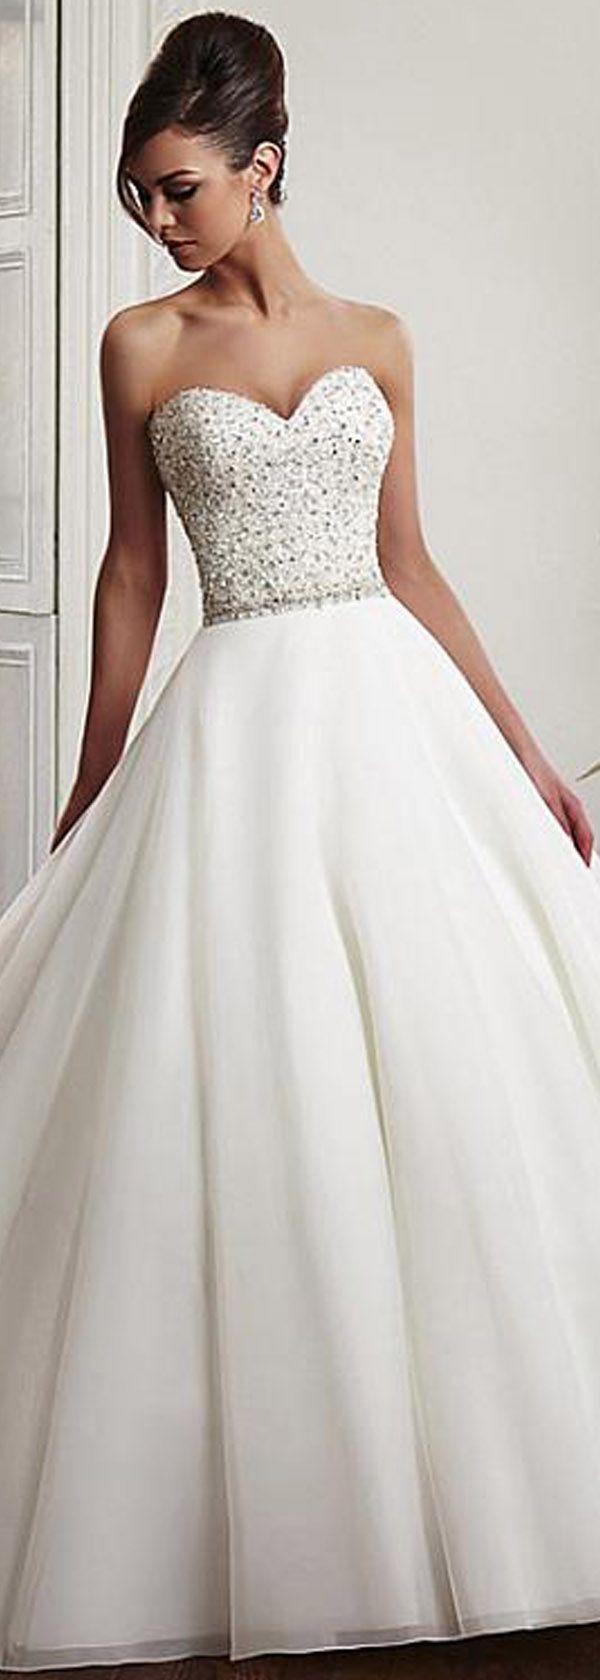 Mariage - The Dress